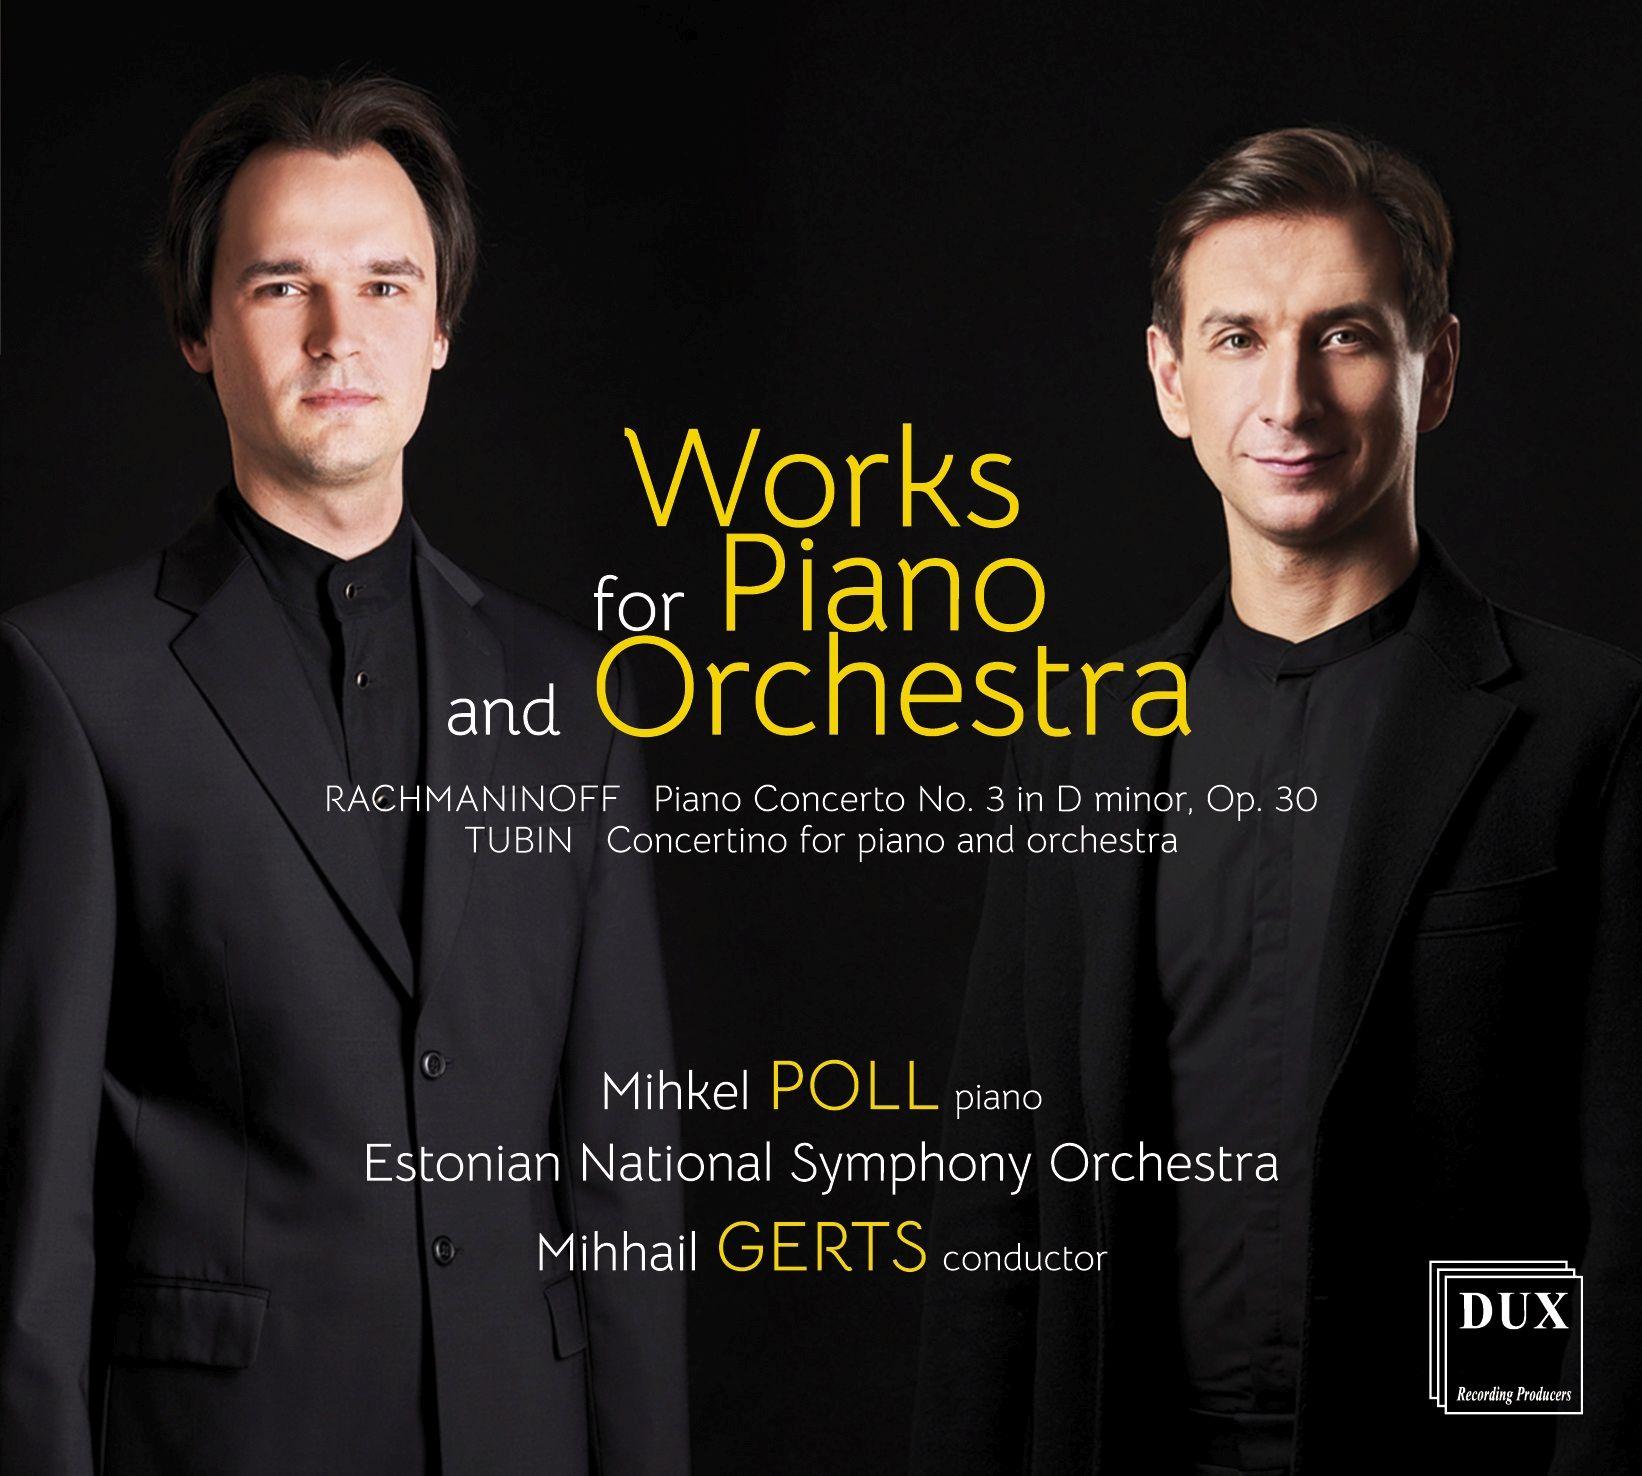 MIHKEL POLL & MIHHAIL GERTS - WORKS FOR PIANO AND ORCHESTRA (2021) CD